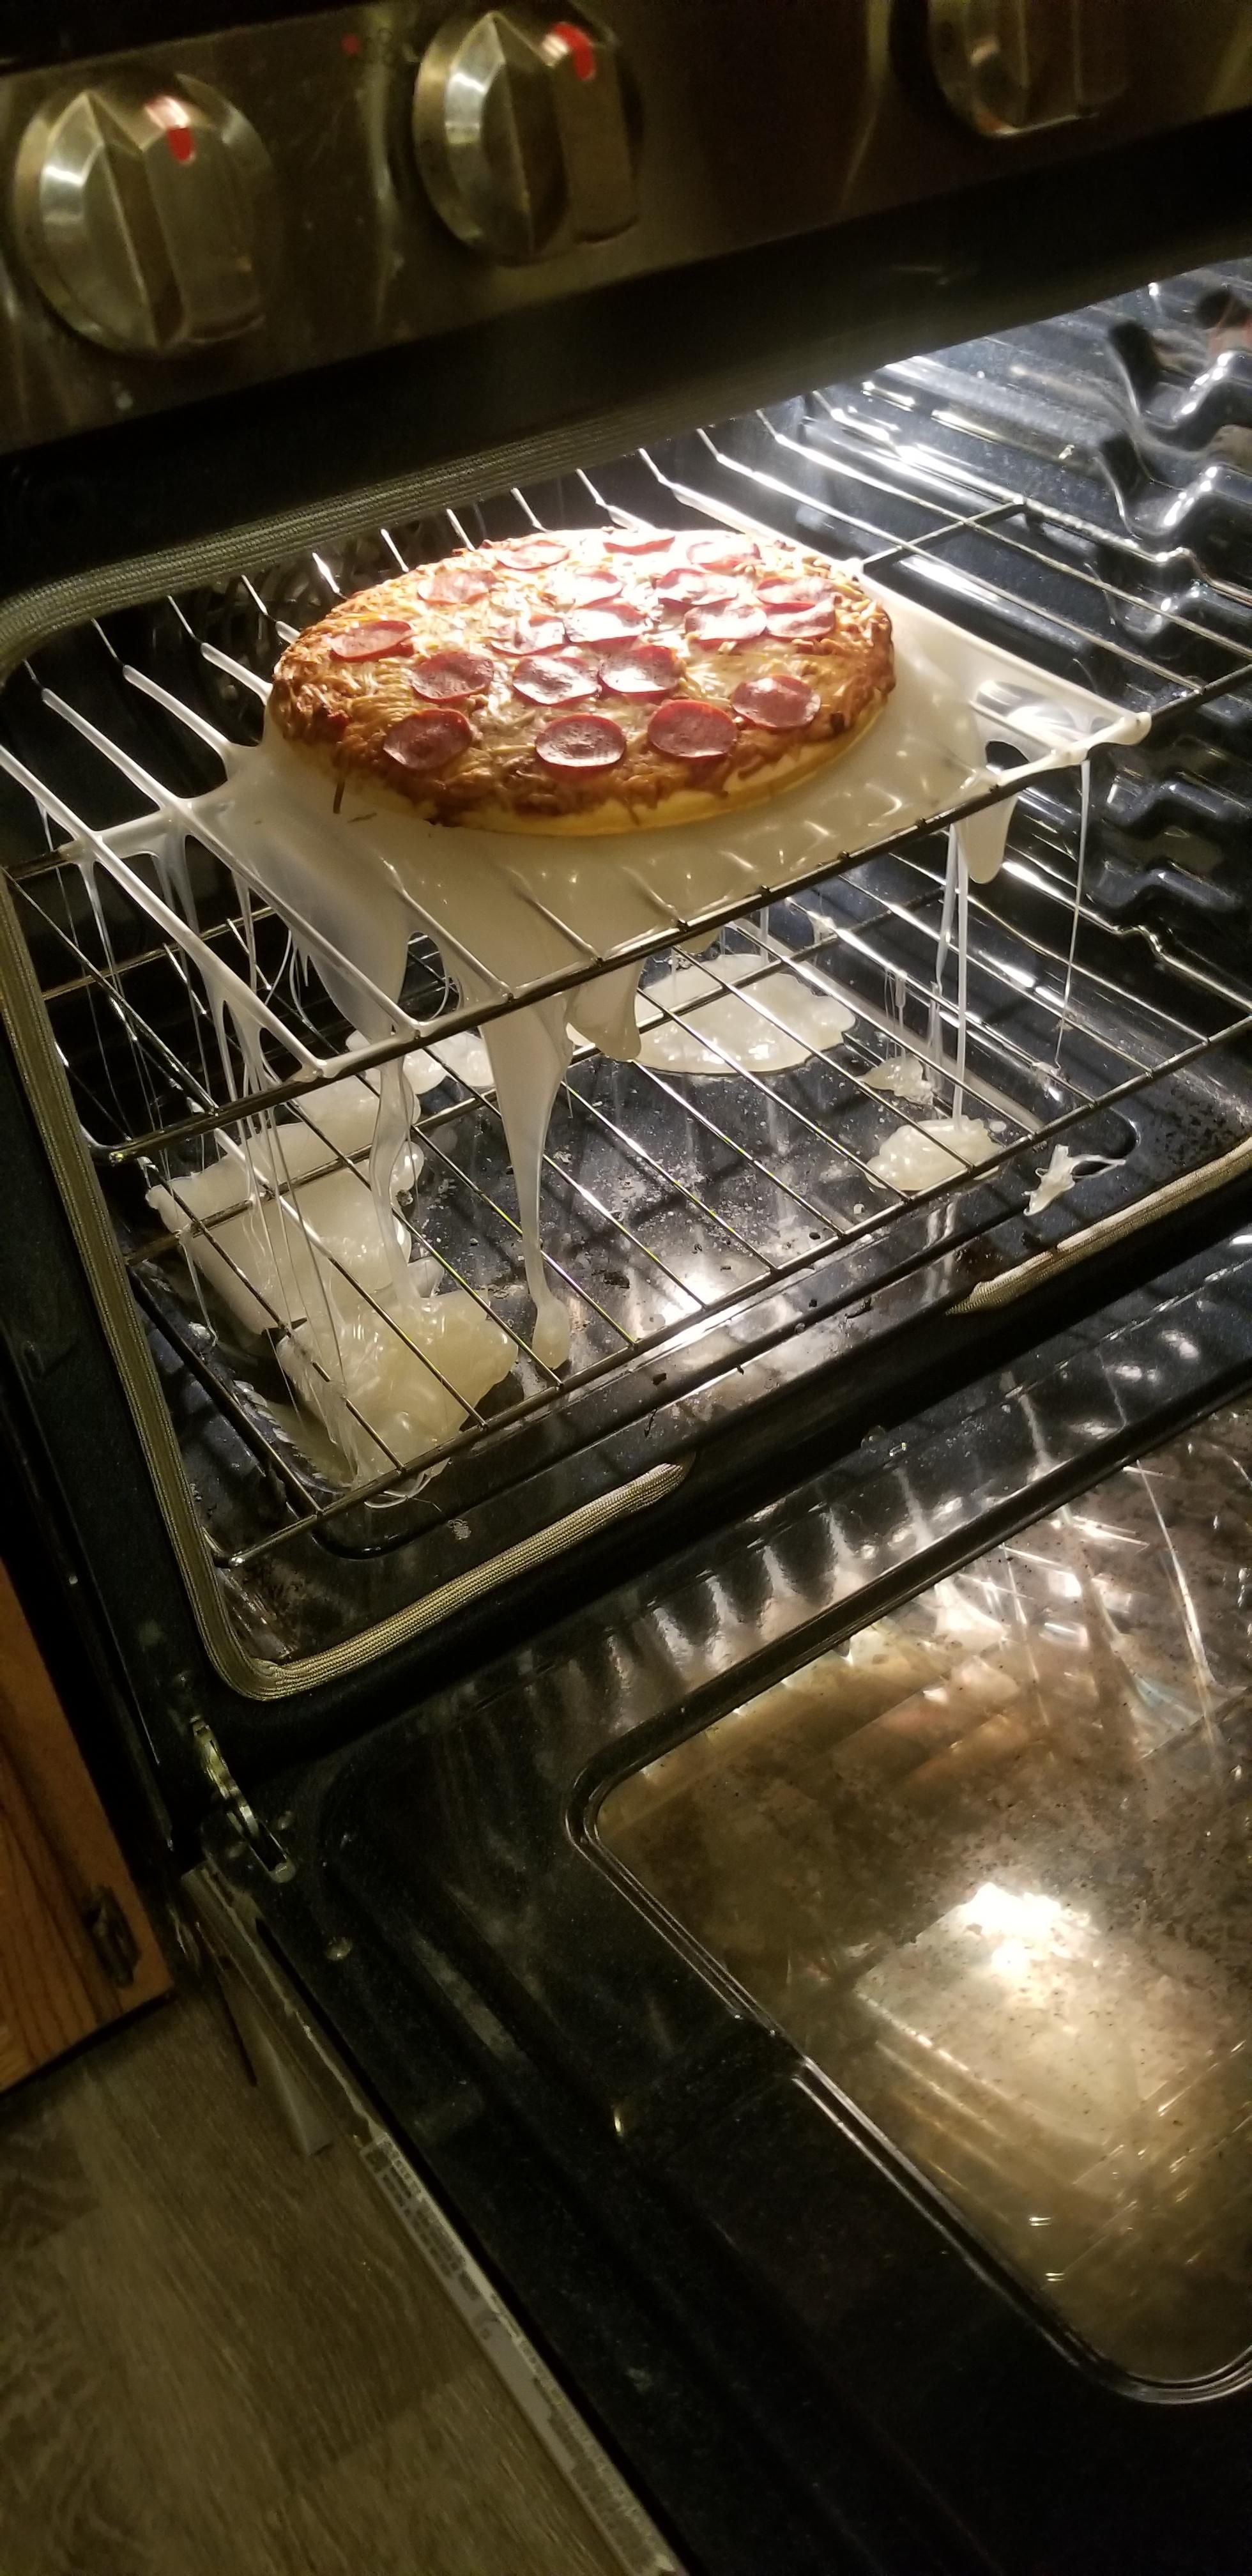 My daughter used a plastic cutting board for a pizza pan.